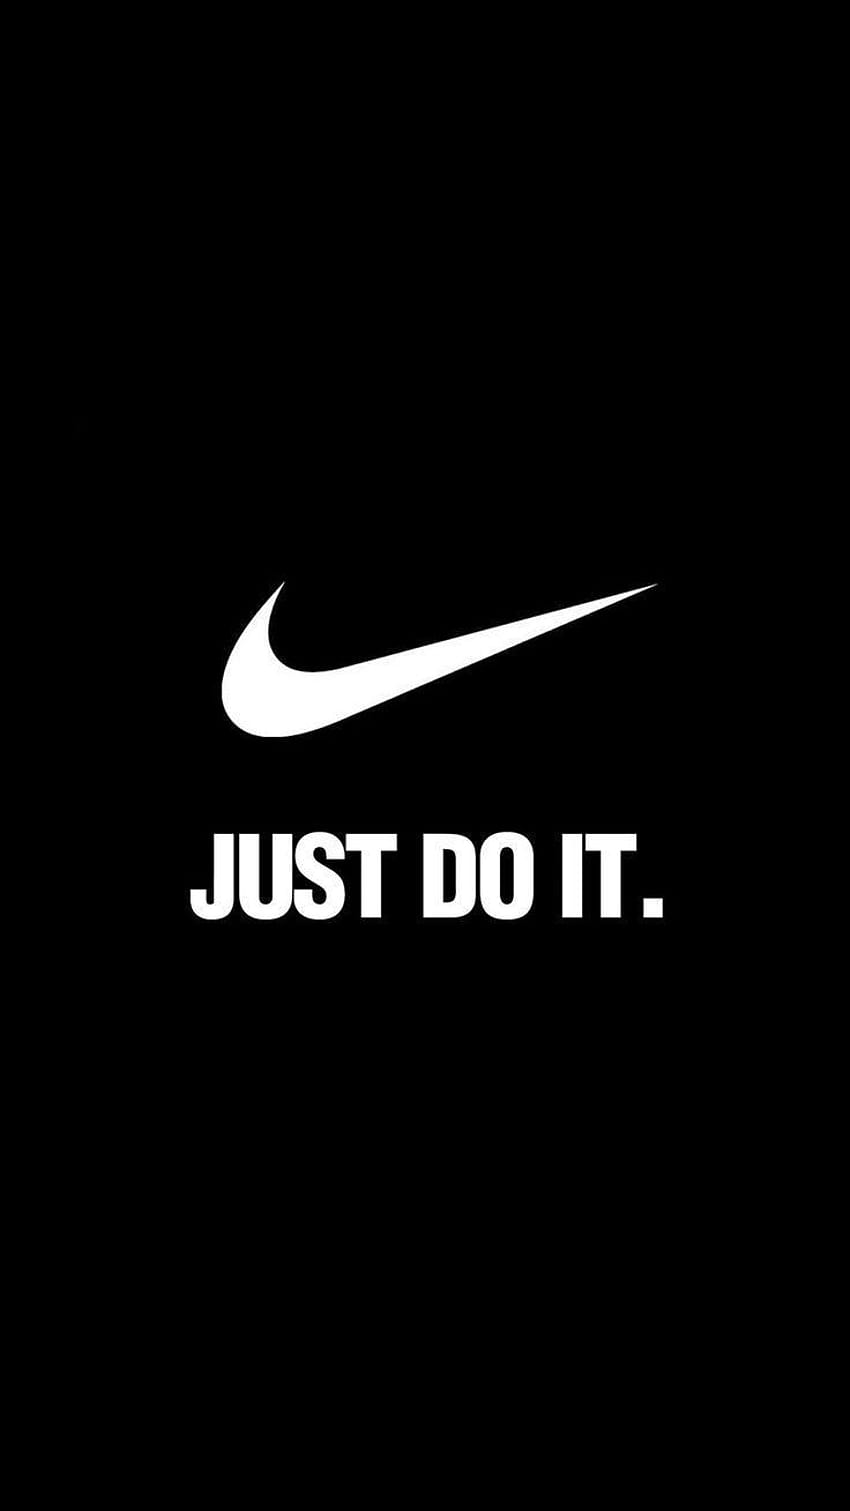 Cool Nike for iPhone, PC Background, Nike Logo, Slogan, nike backgrounds for iphone HD phone wallpaper